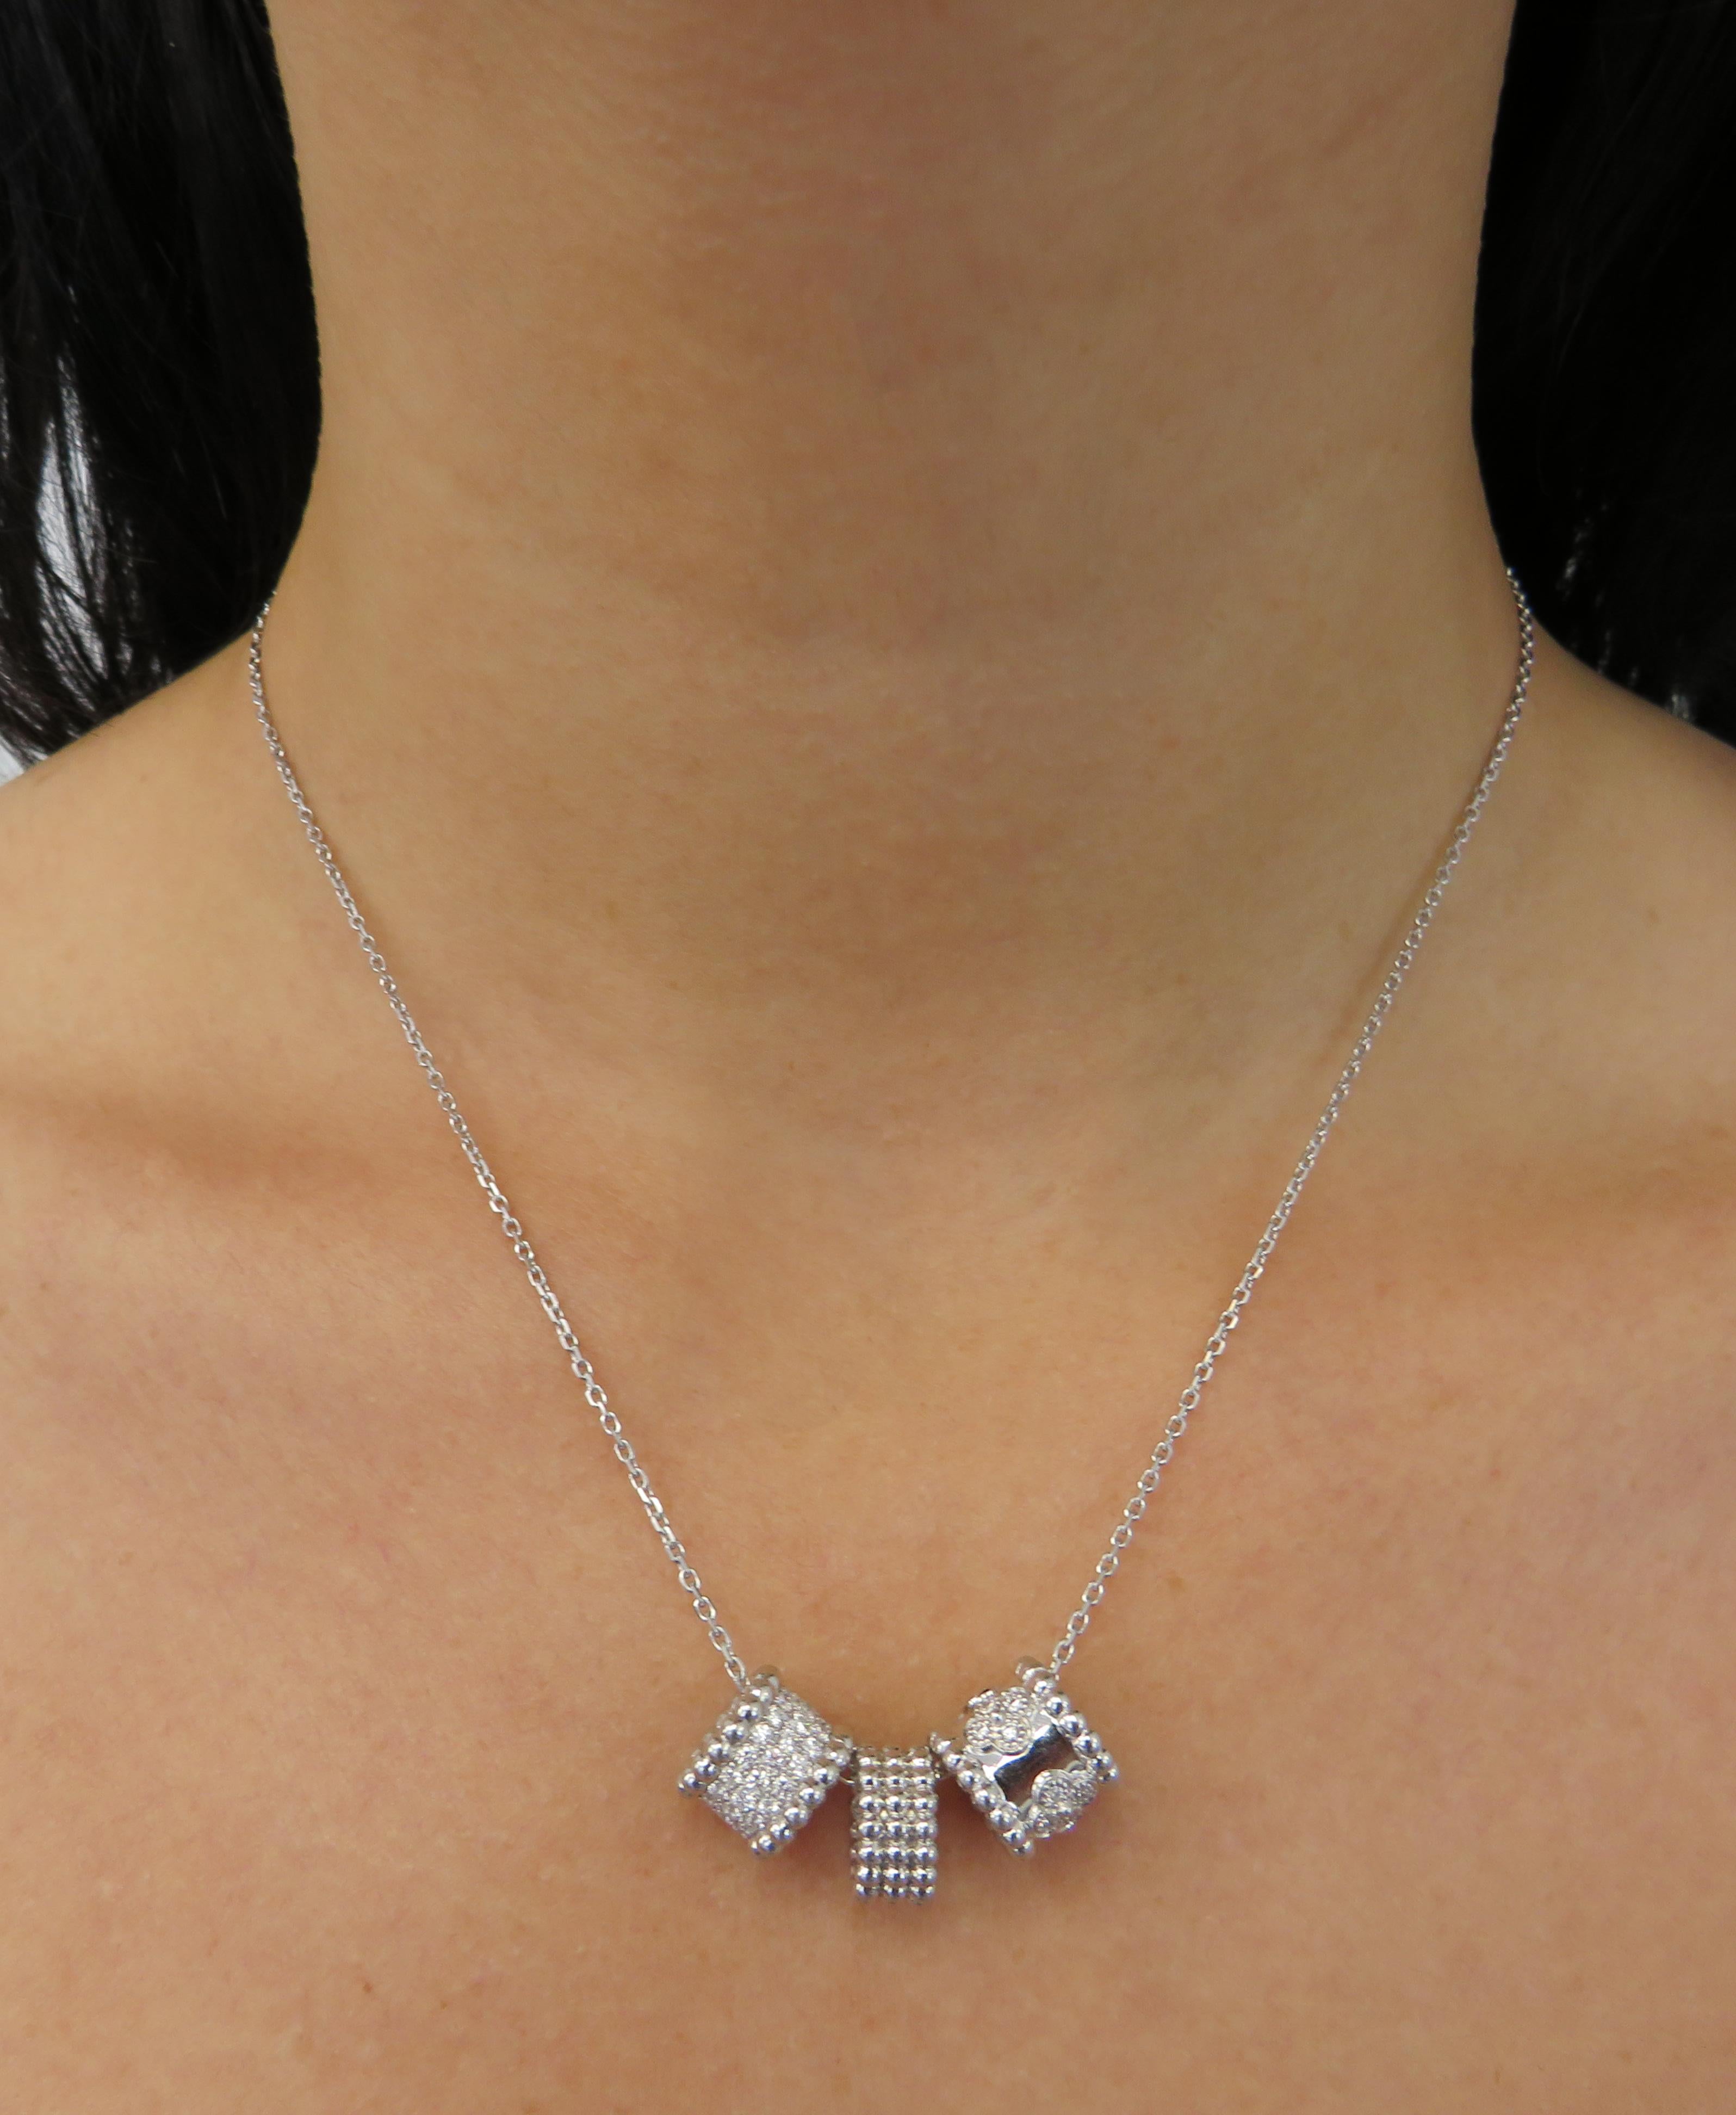 Magnificent Van Cleef & Arpels white gold trace chain necklace with 3 Perlée Pendants, crafted in 18 karat white gold, featuring 67 round brilliant cut diamonds weighing approximately 1.39 carats total, D-F color, IF-VVS clarity. The trace chain